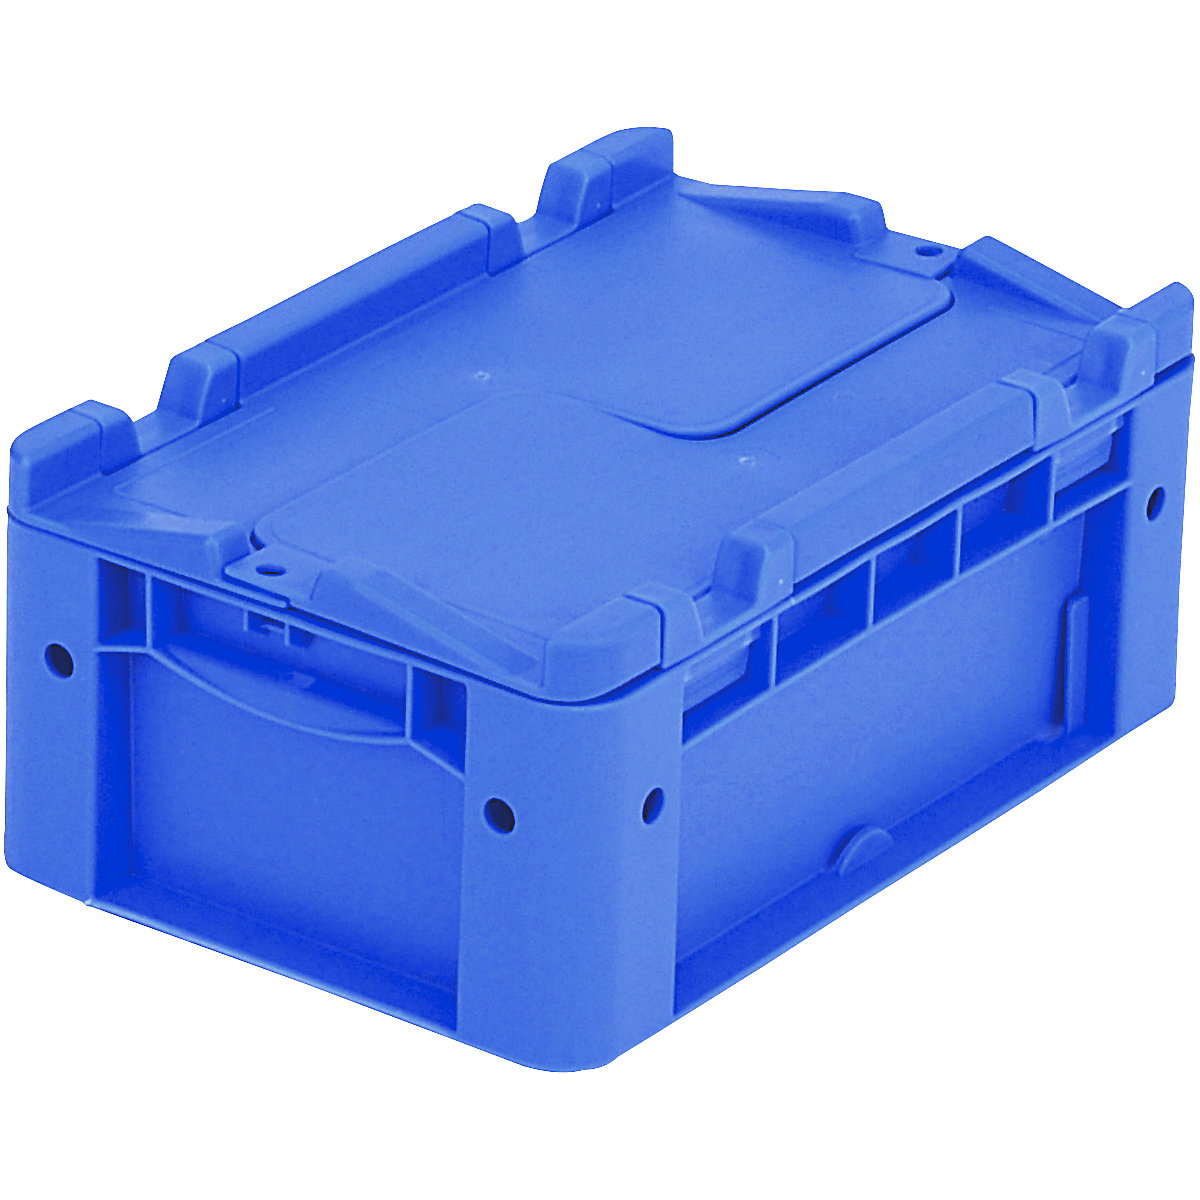 XL Euro stacking container - BITO